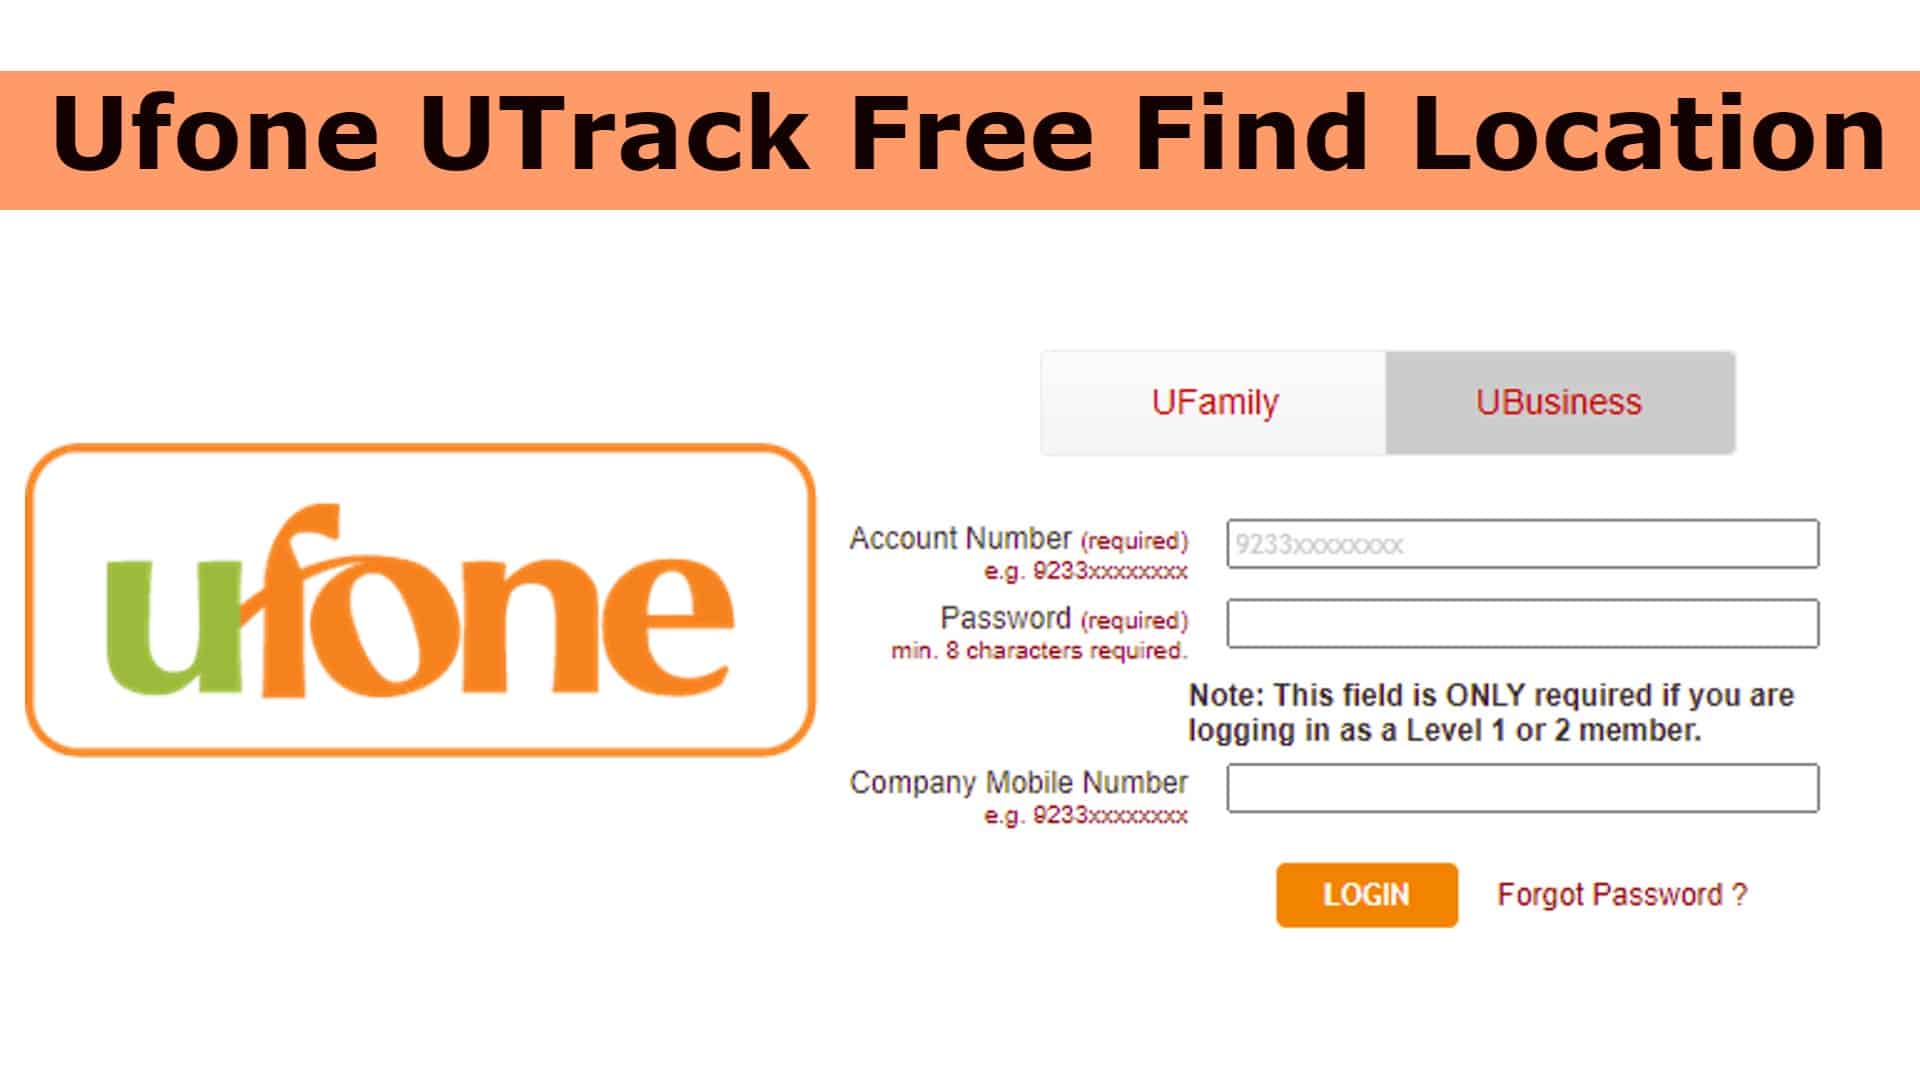 Ufone UTrack Free Find Location